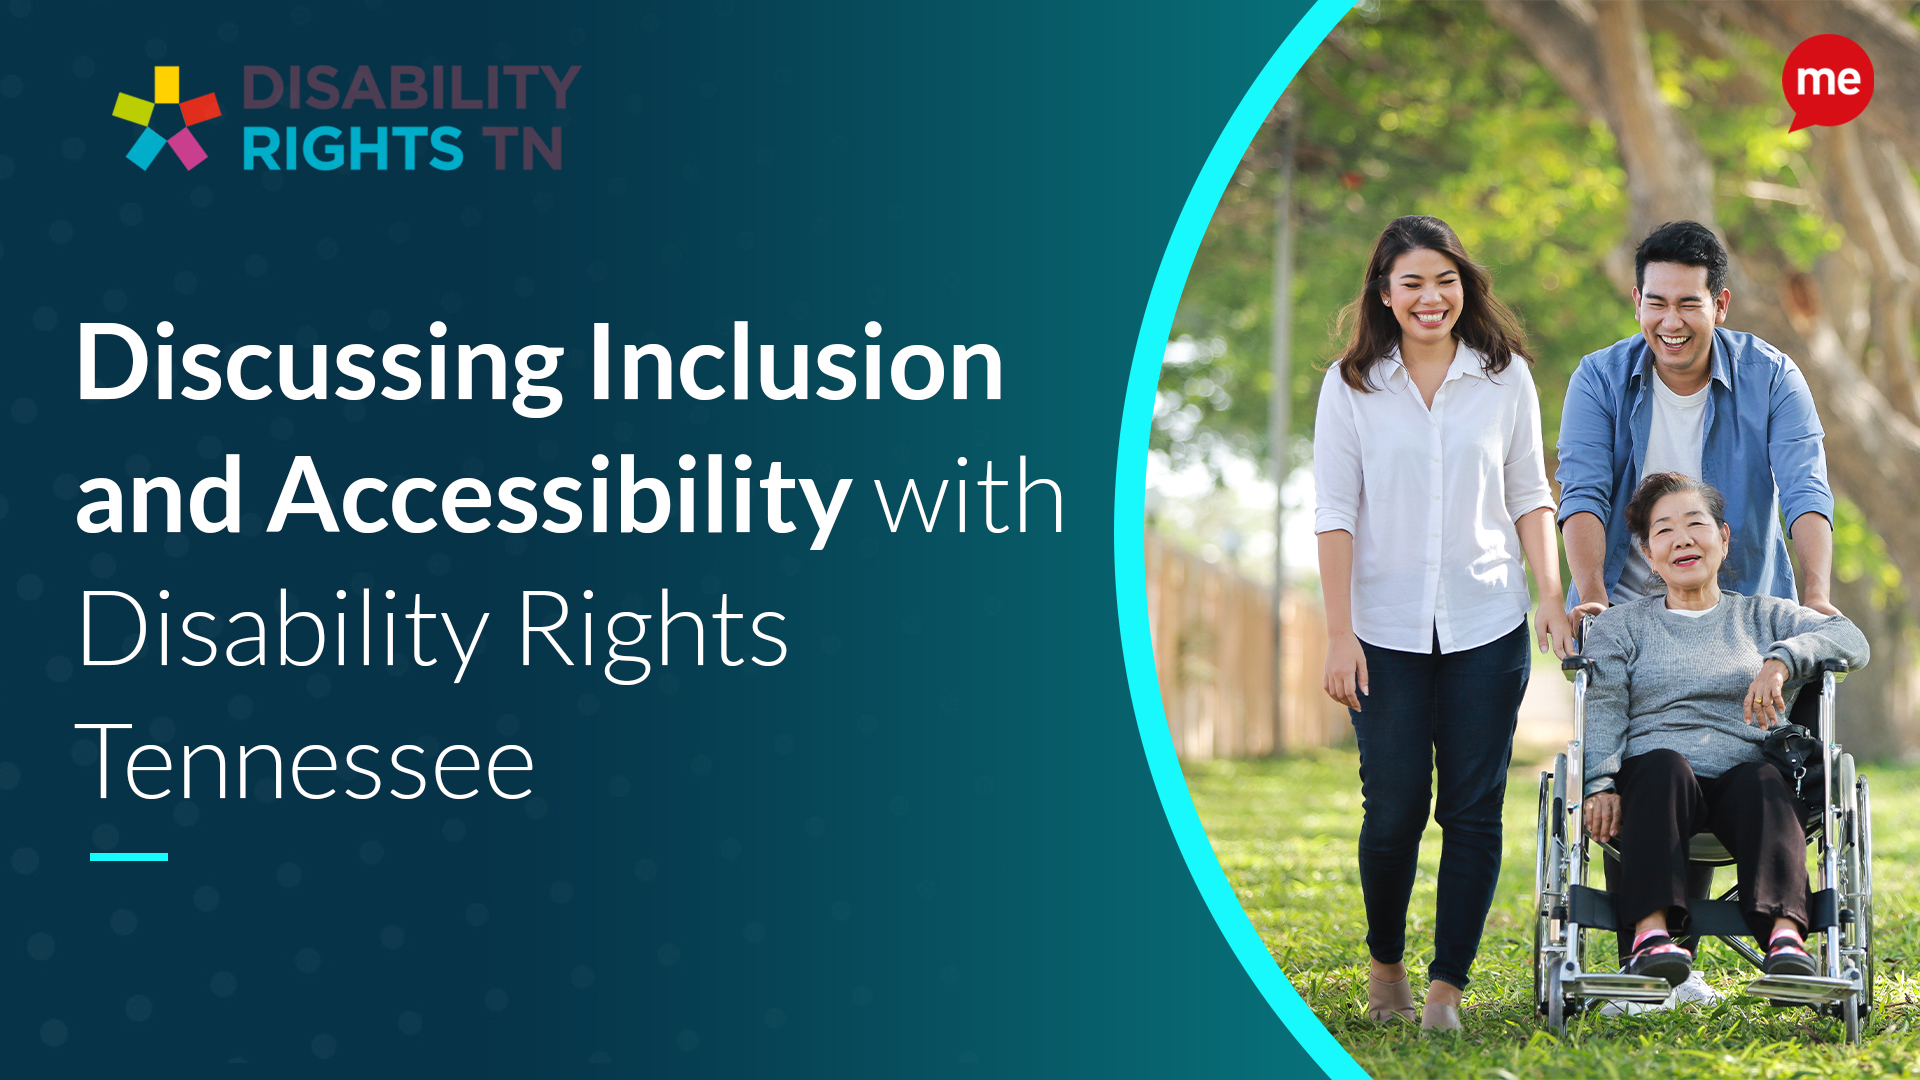 Discussing Inclusion and Accessibility with Disability Rights Tennessee